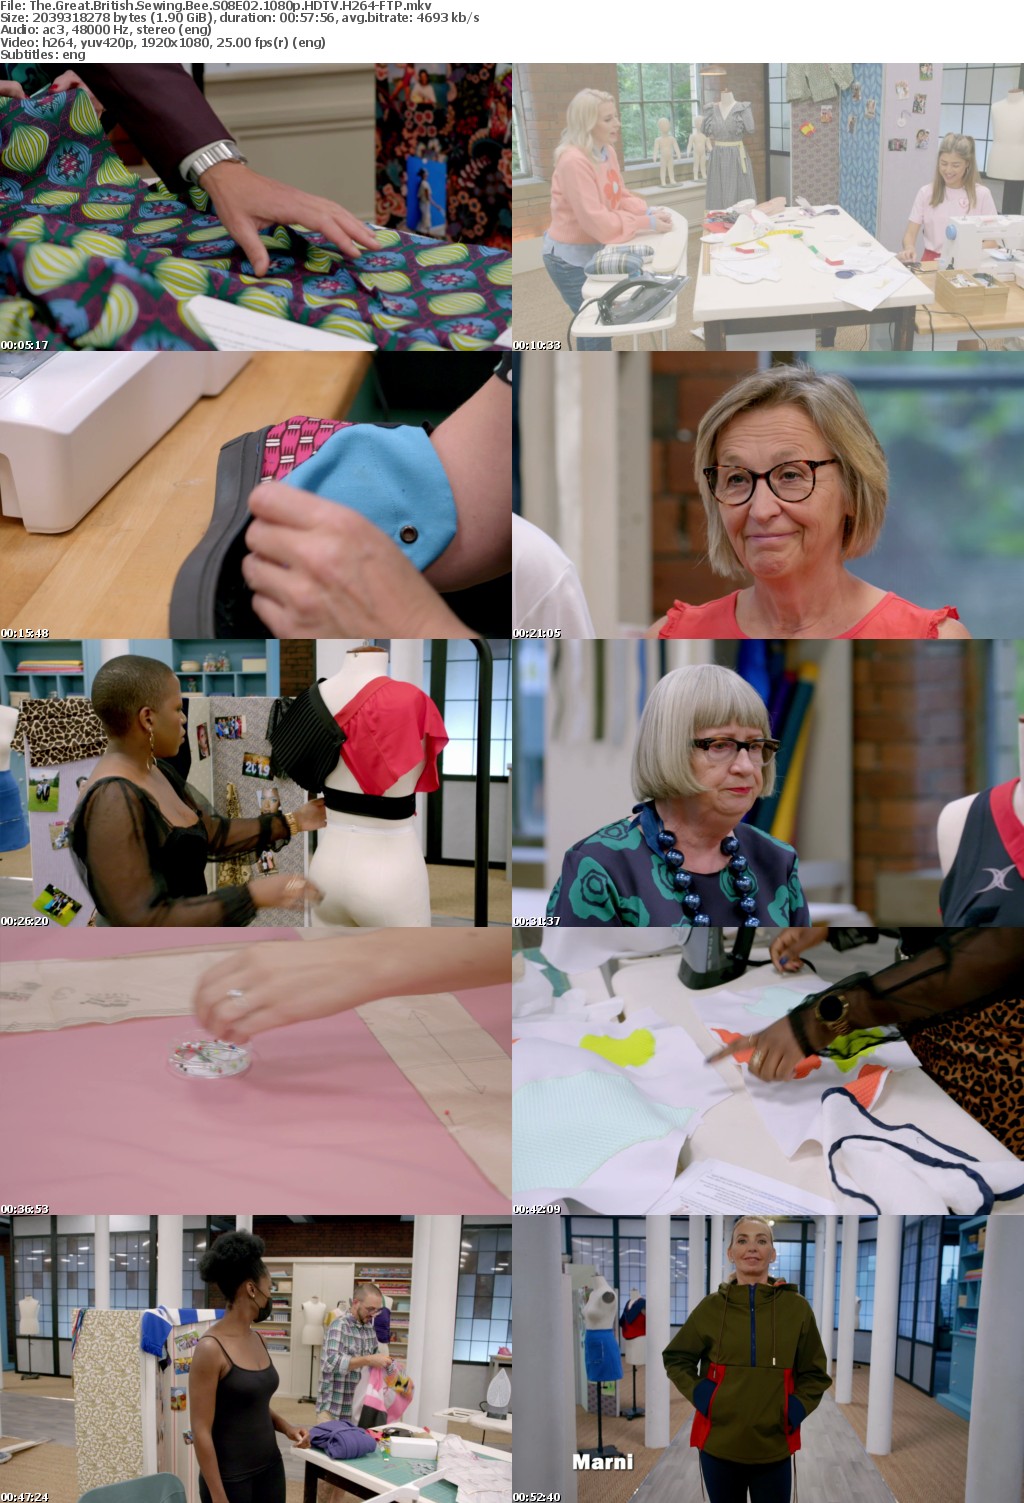 The Great British Sewing Bee S08E02 1080p HDTV H264-FTP